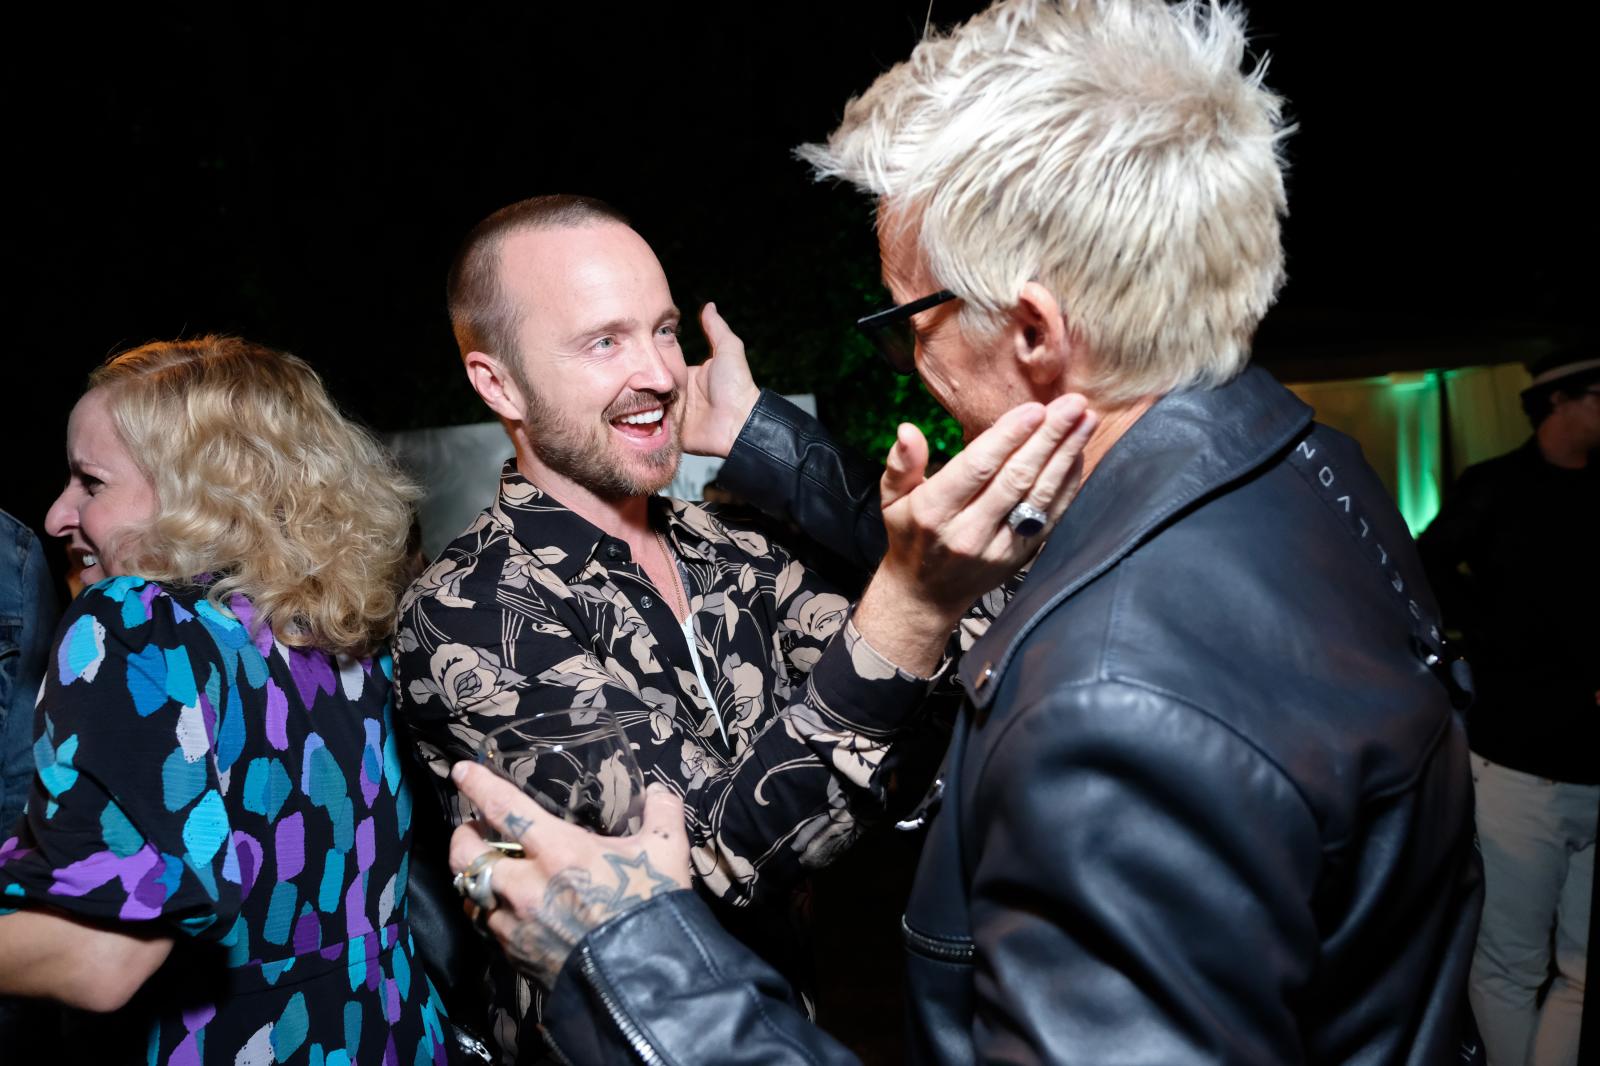 Image from RED CARPET I CELEBRITY - HOLLYWOOD, CALIFORNIA - NOVEMBER 09: Aaron Paul and...